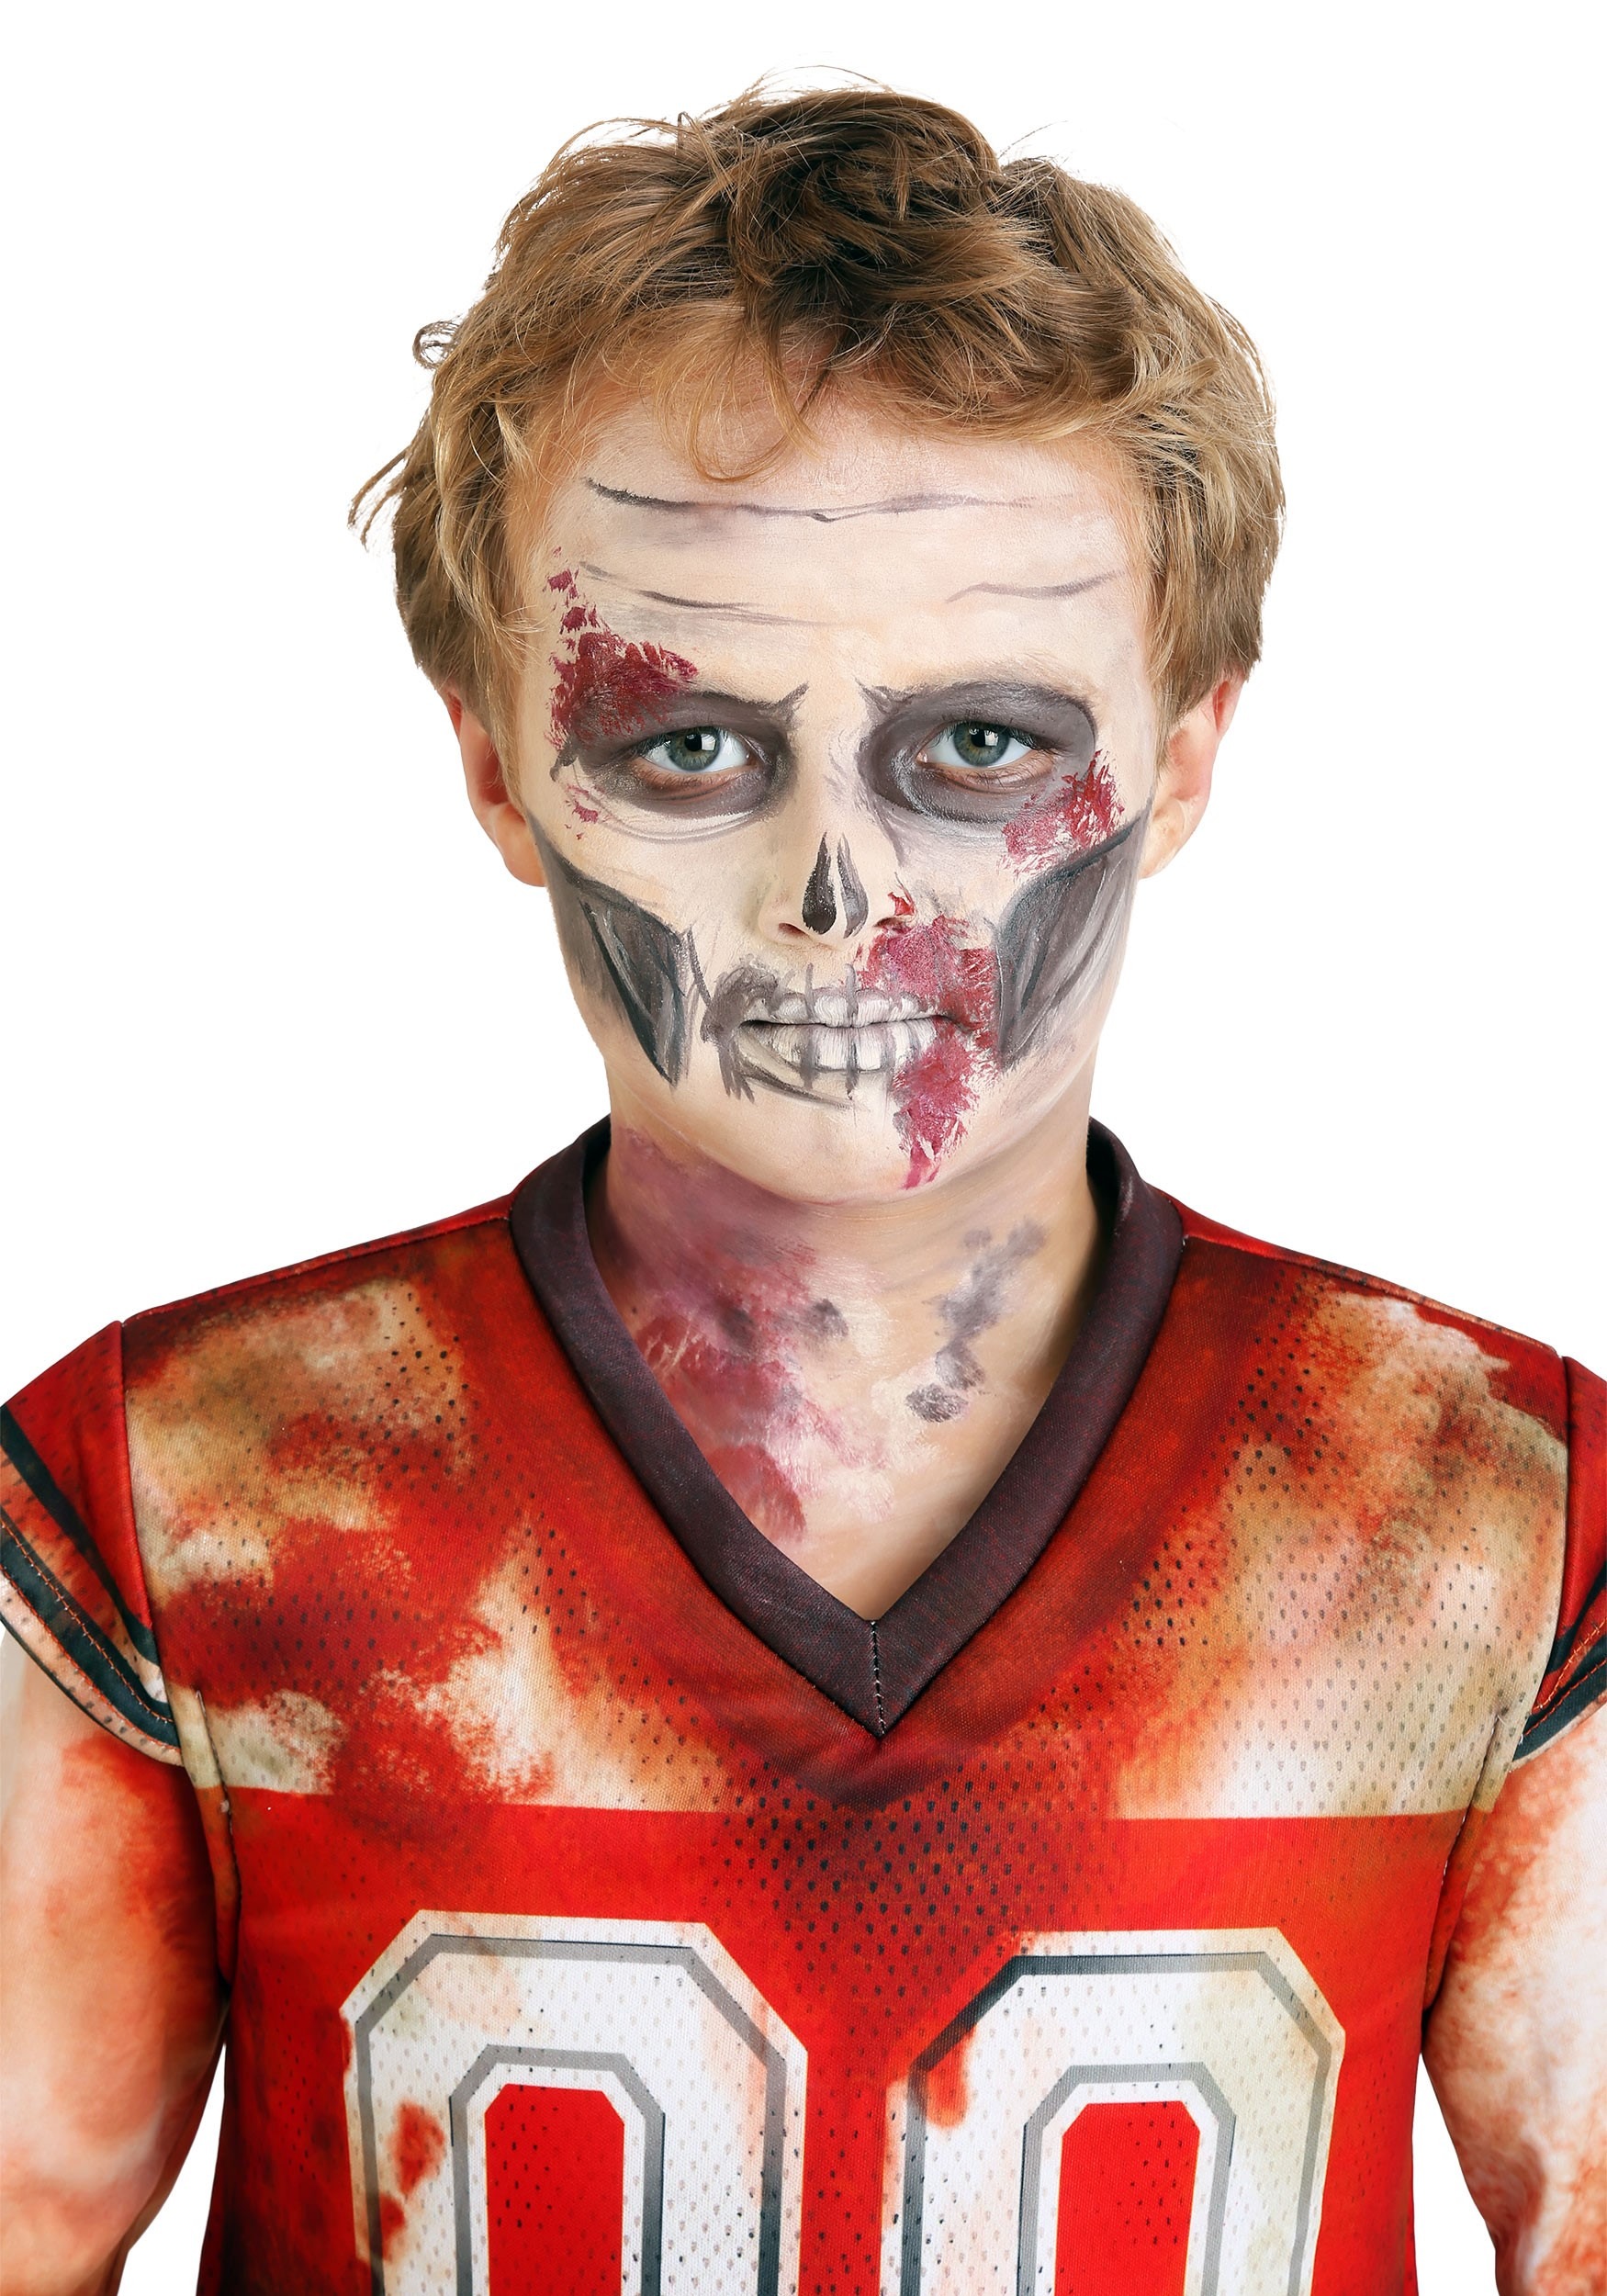 Zombie Football Player Costume For Kids